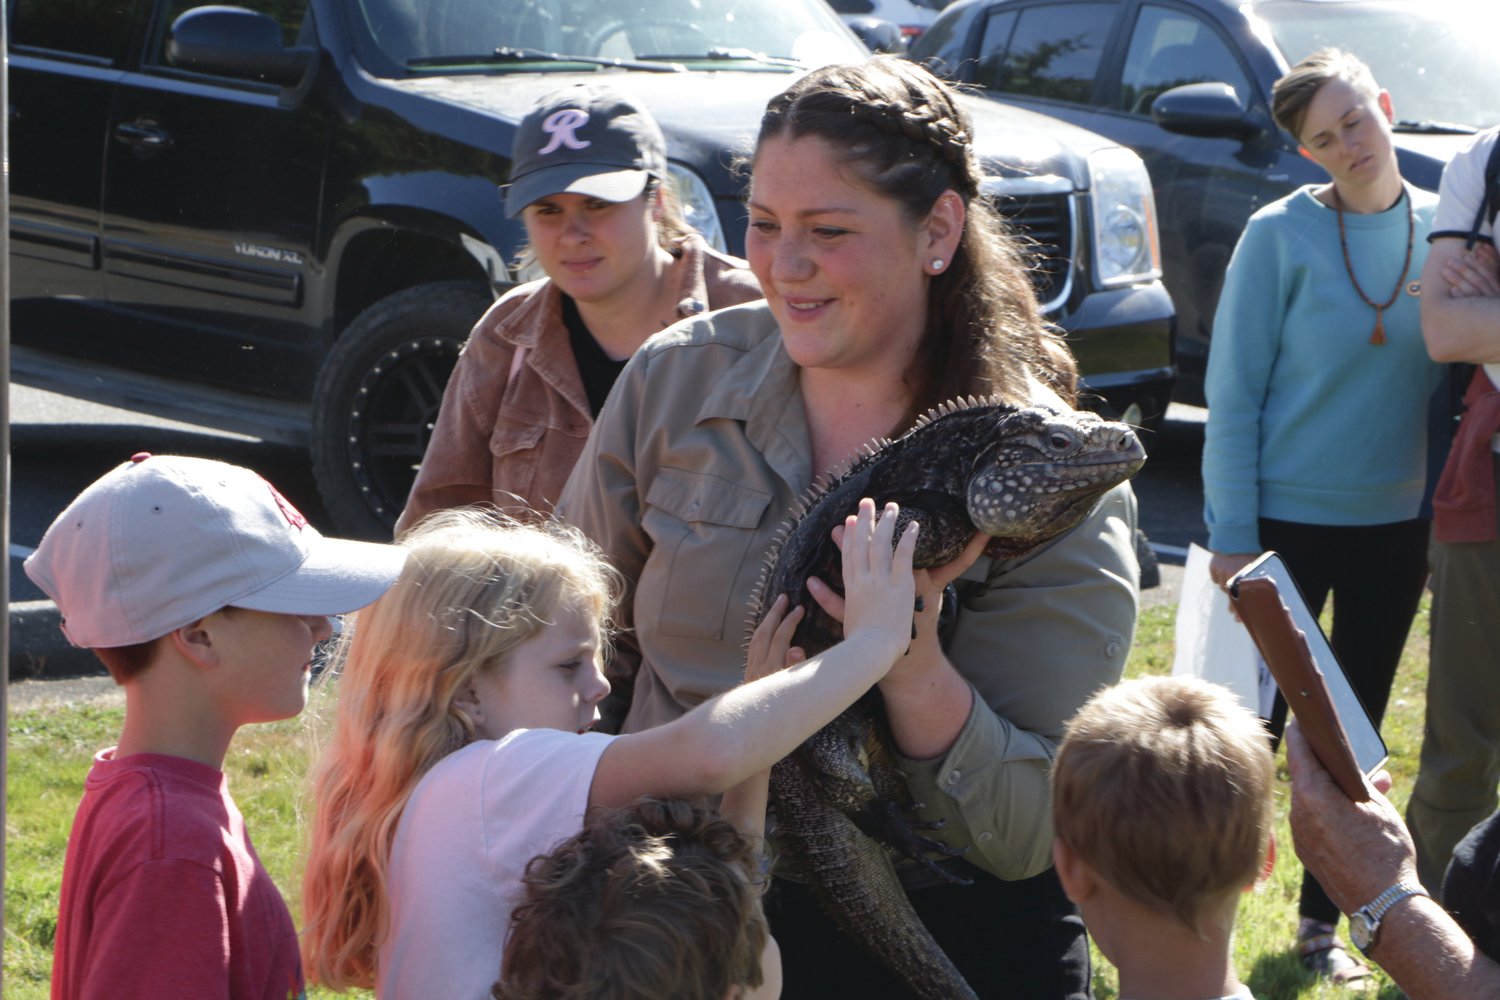 The Reptile Lady showcases a reptile to enthusiastic children at the 33rd annual Nisqually Watershed Festival on Sept. 24.